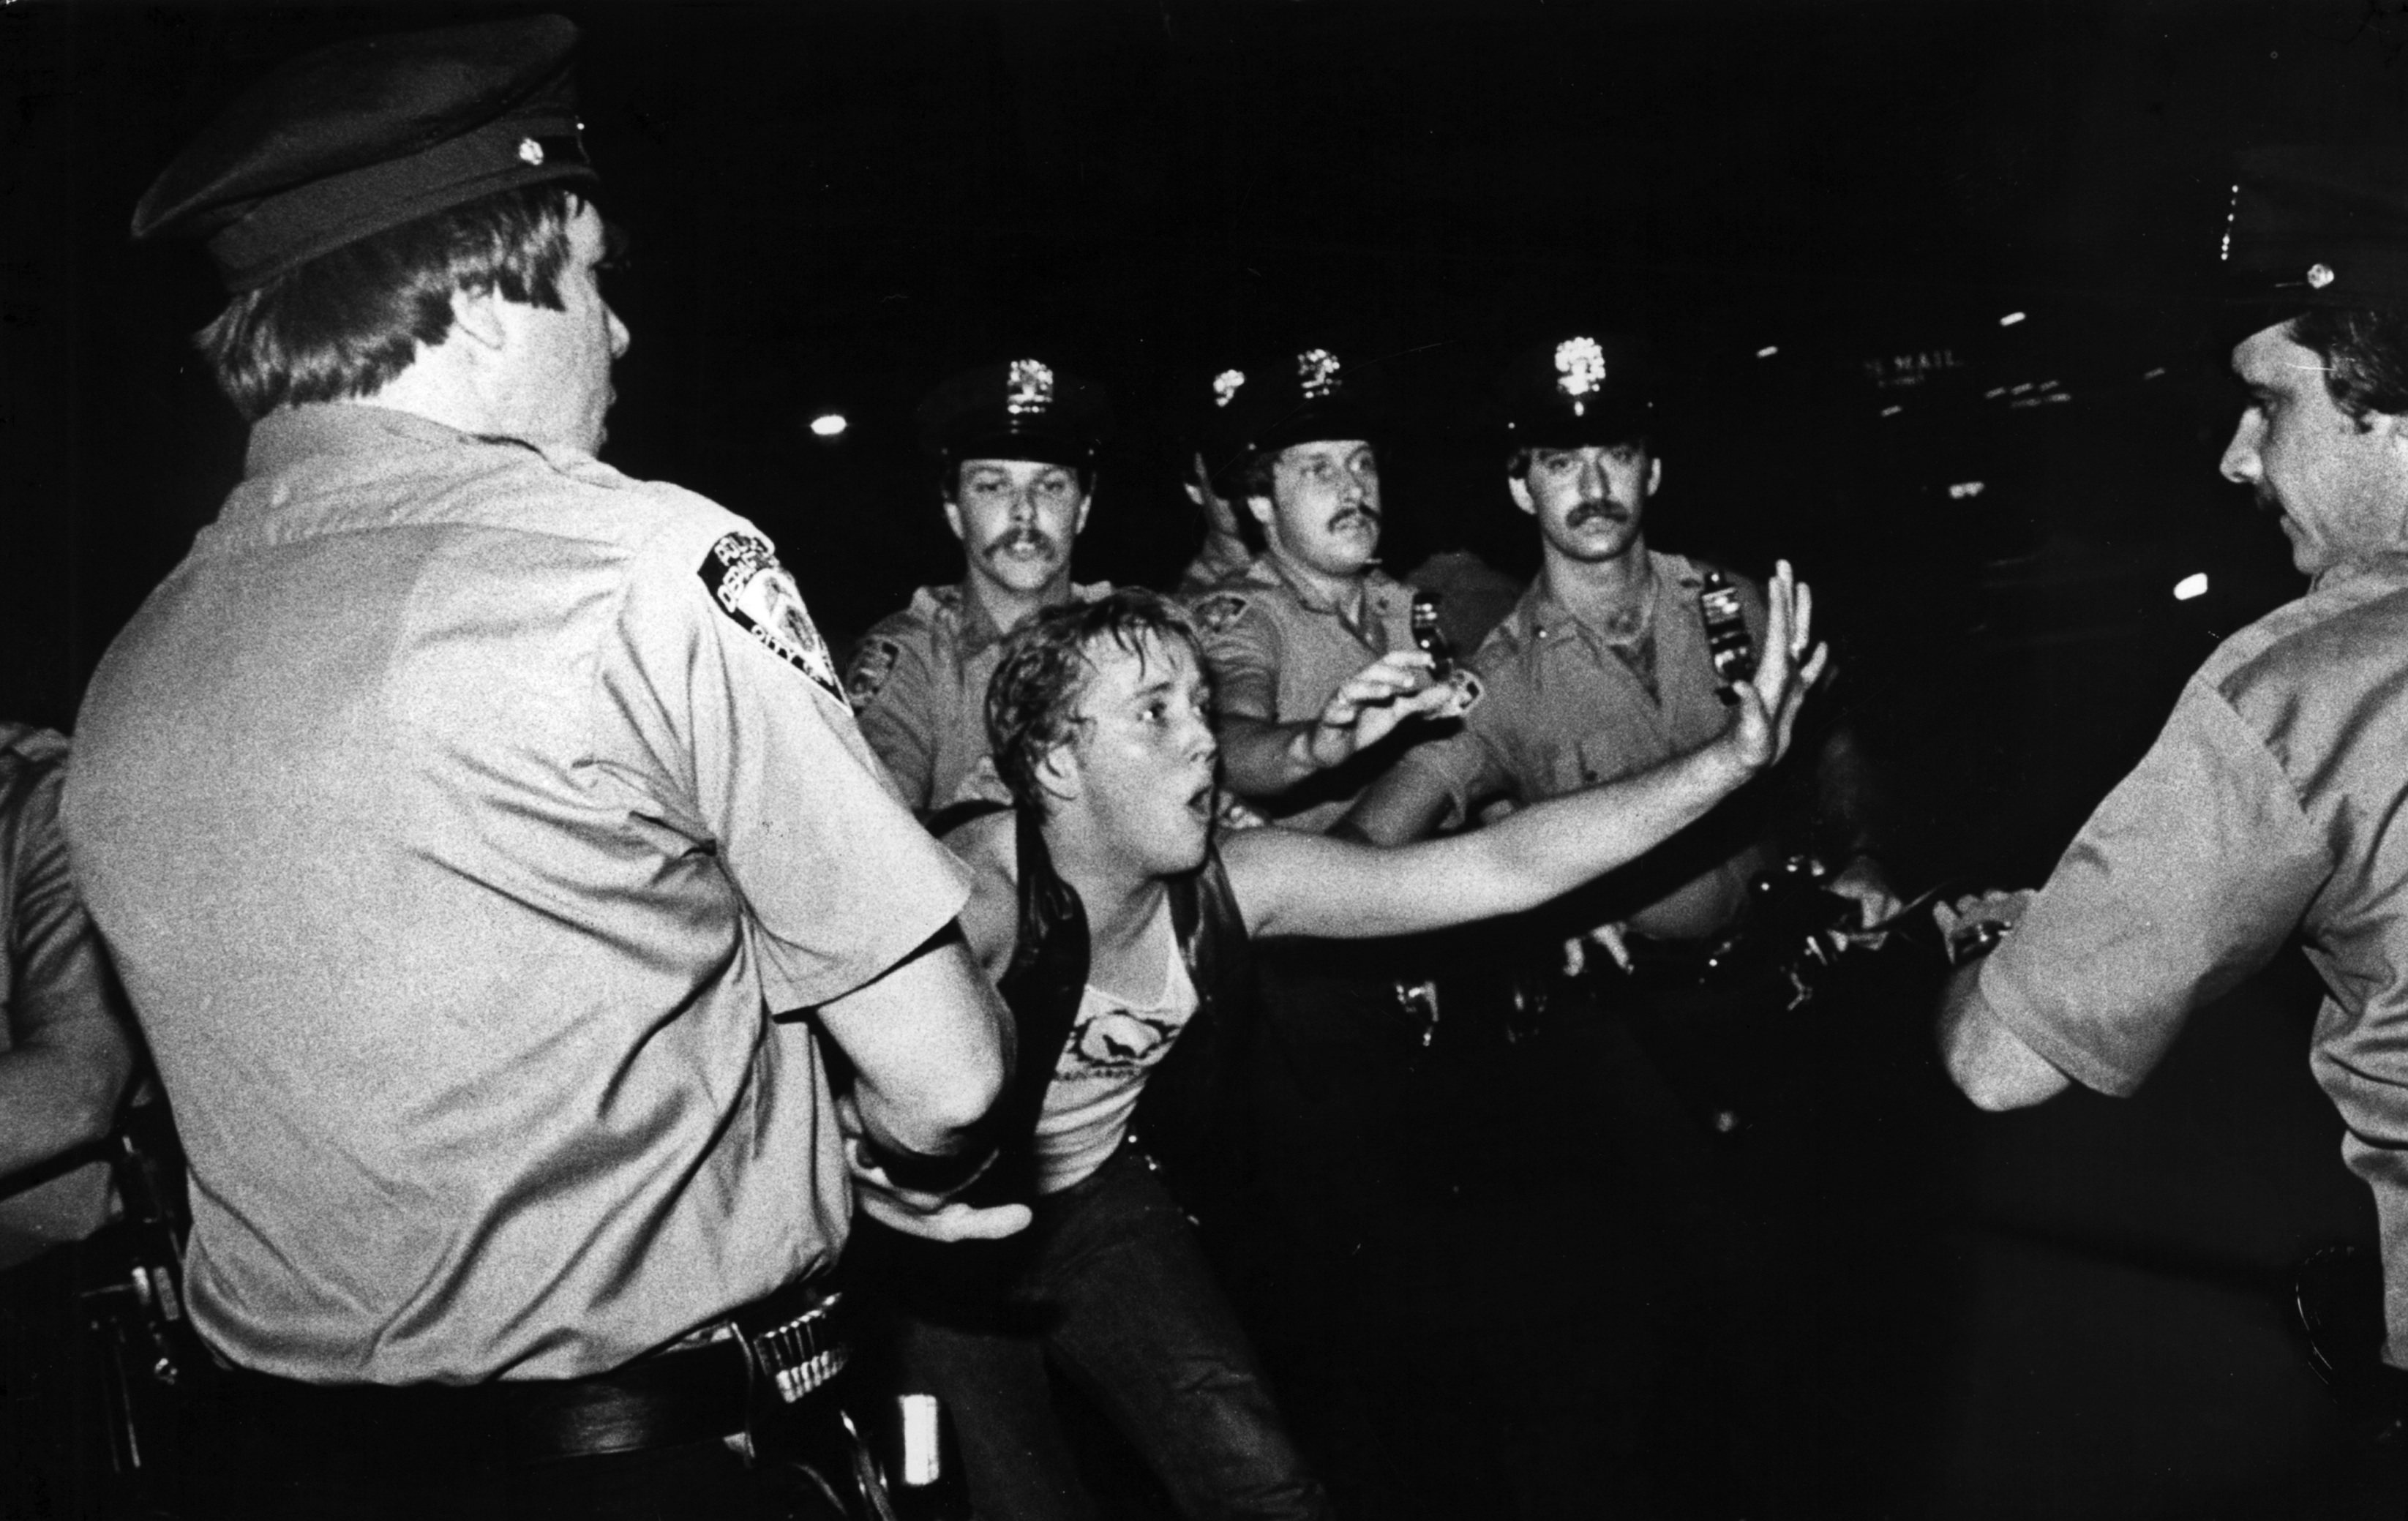 A scene during the 1969 Stonewall riots, as seen in Kate Davis a